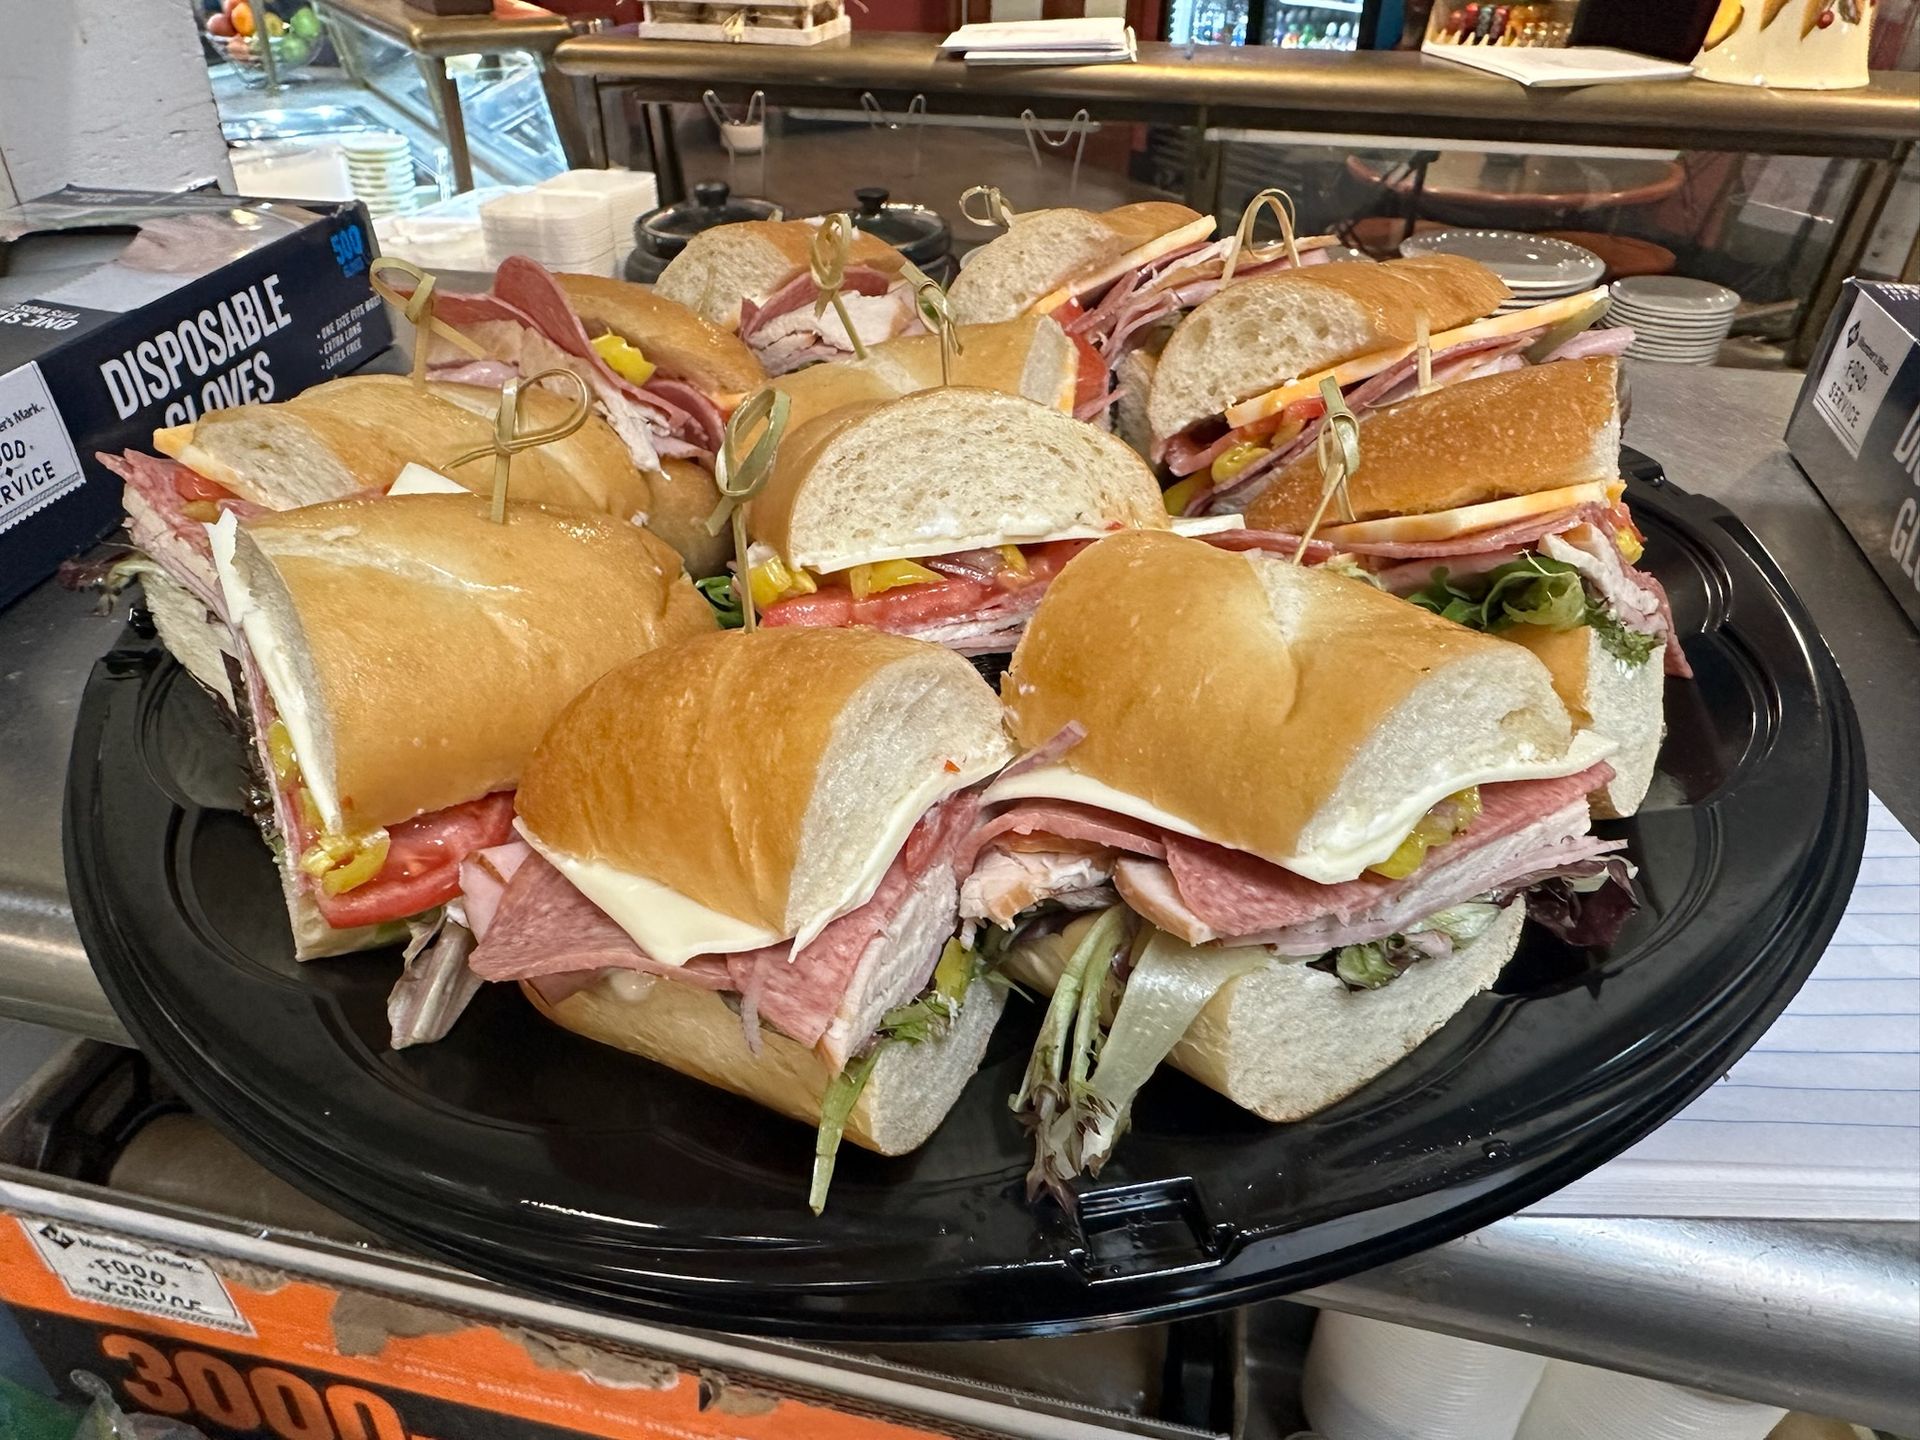 a tray of sub sandwiches on a table with a box of disposable gloves in the background .